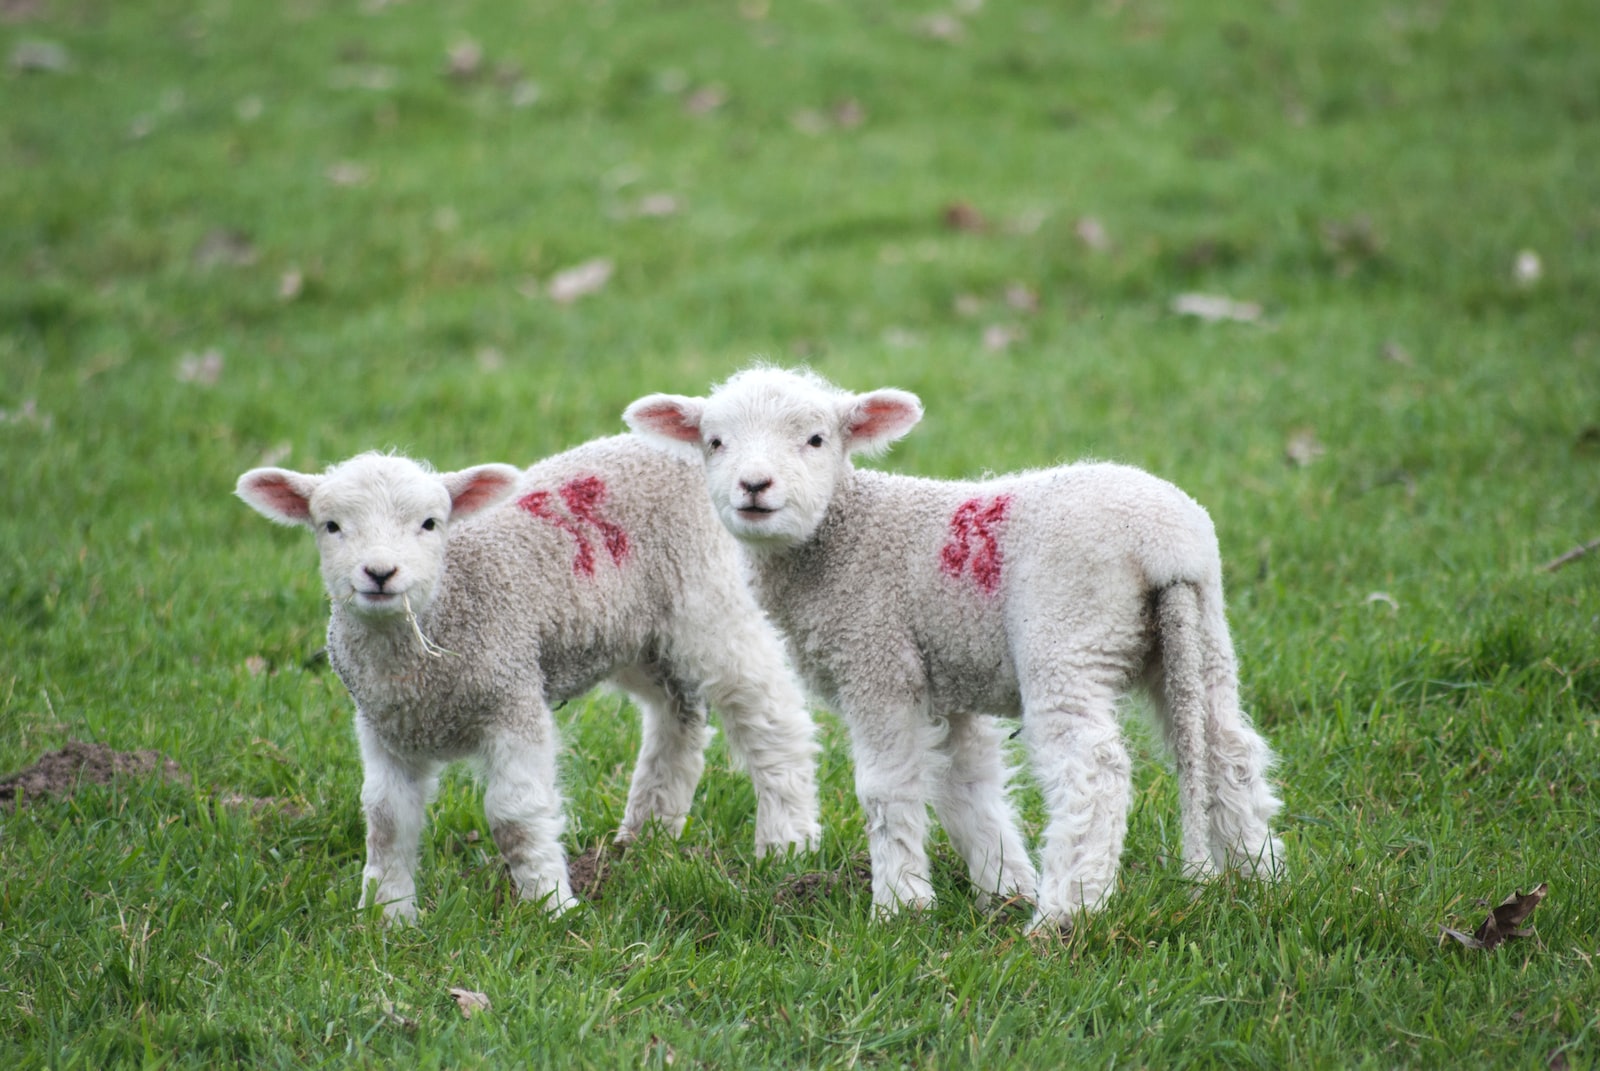 two white-and-red sheeps